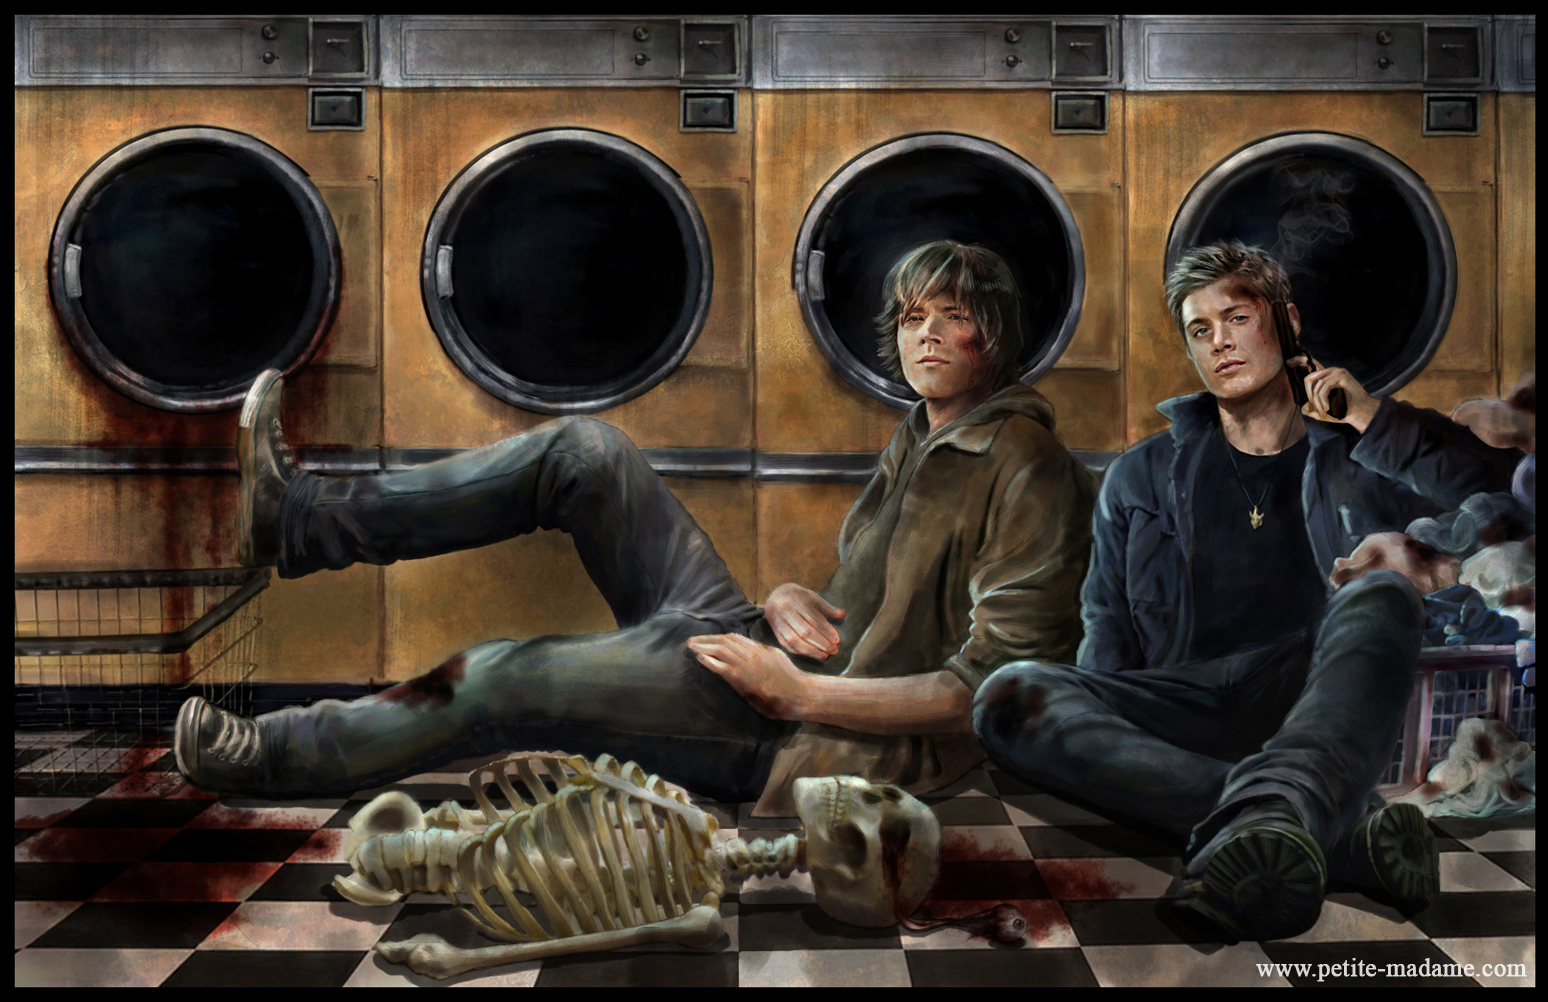 supernatural-winchesters-laundry-day